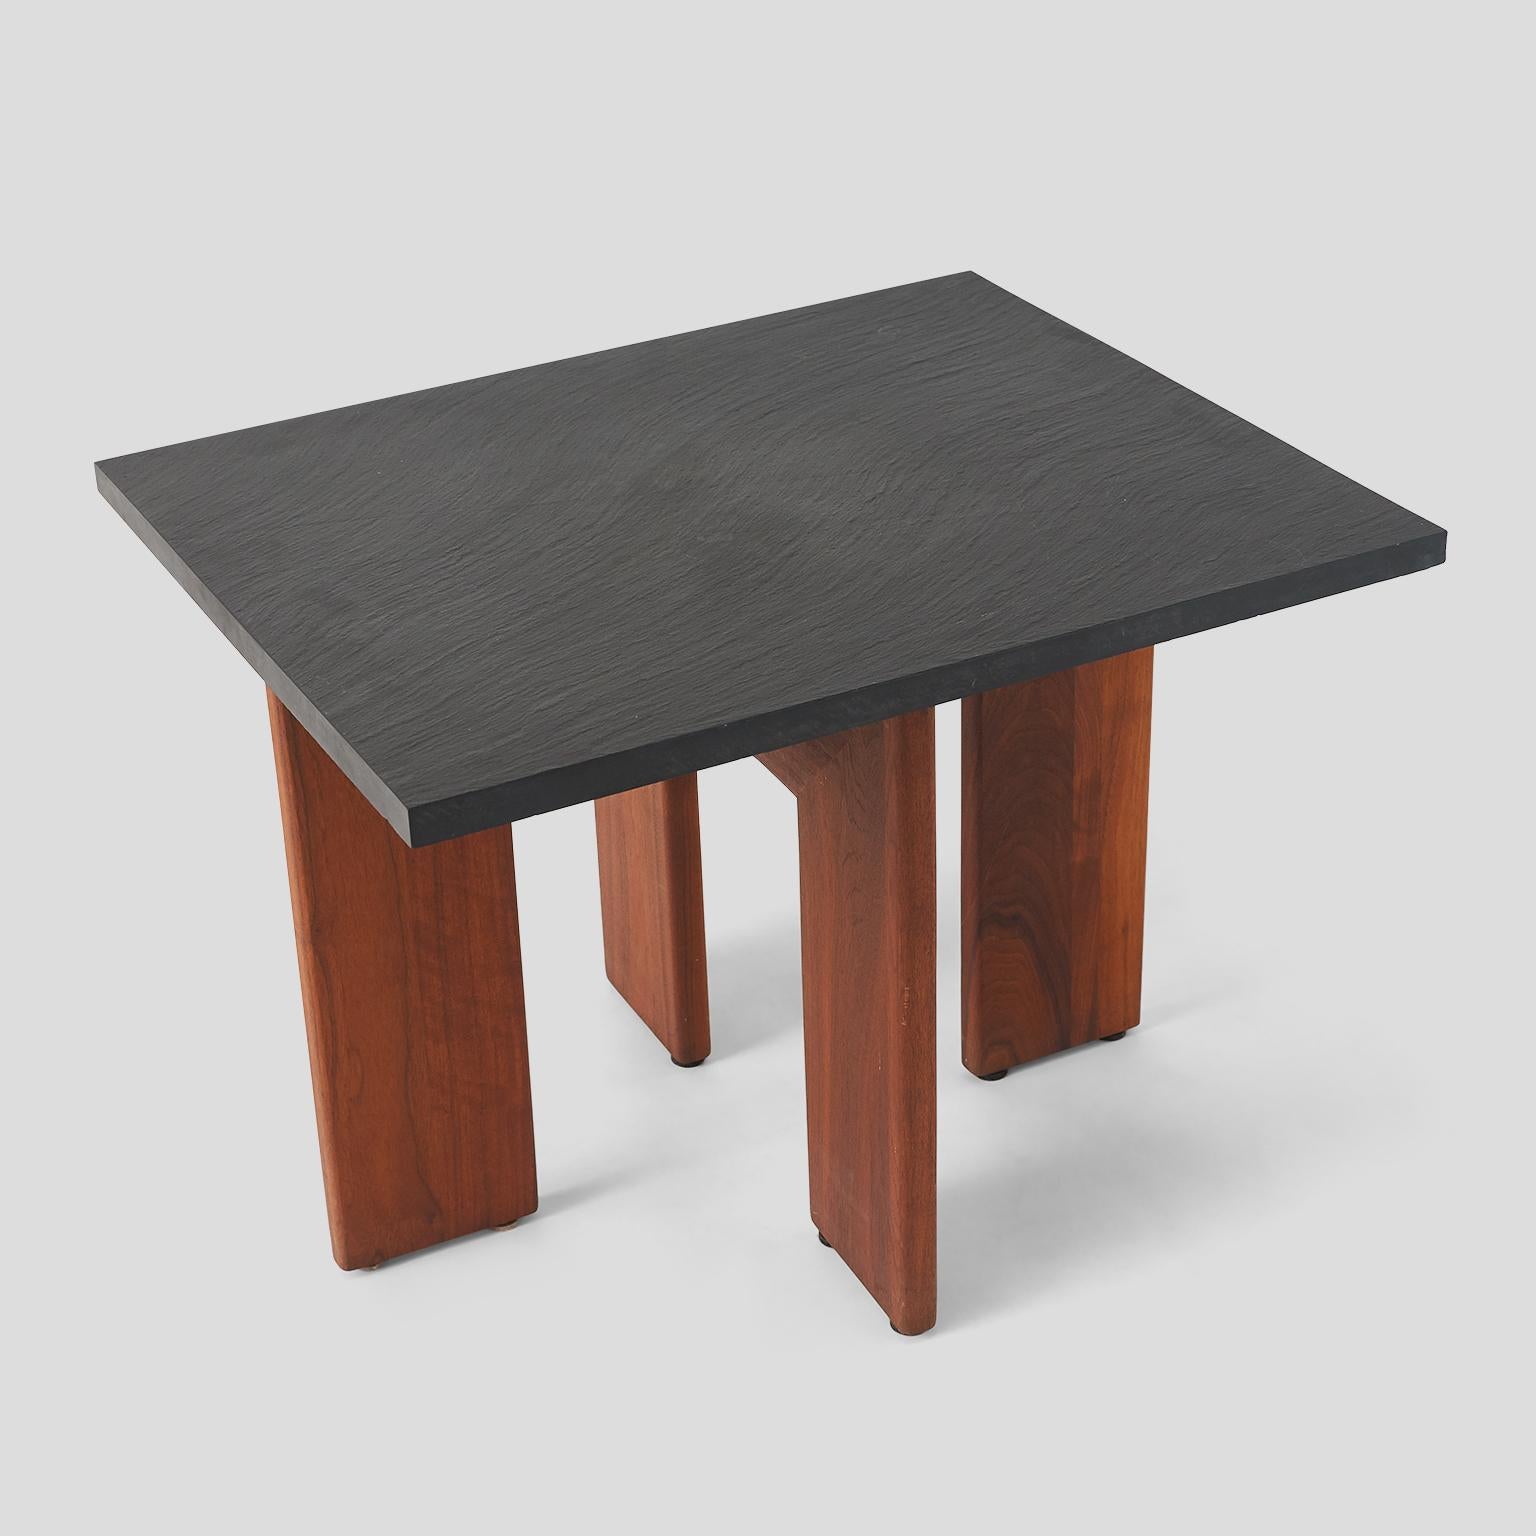 A gorgeous end table in American walnut with a grey stone slab top. Wide wooden legs forming a 